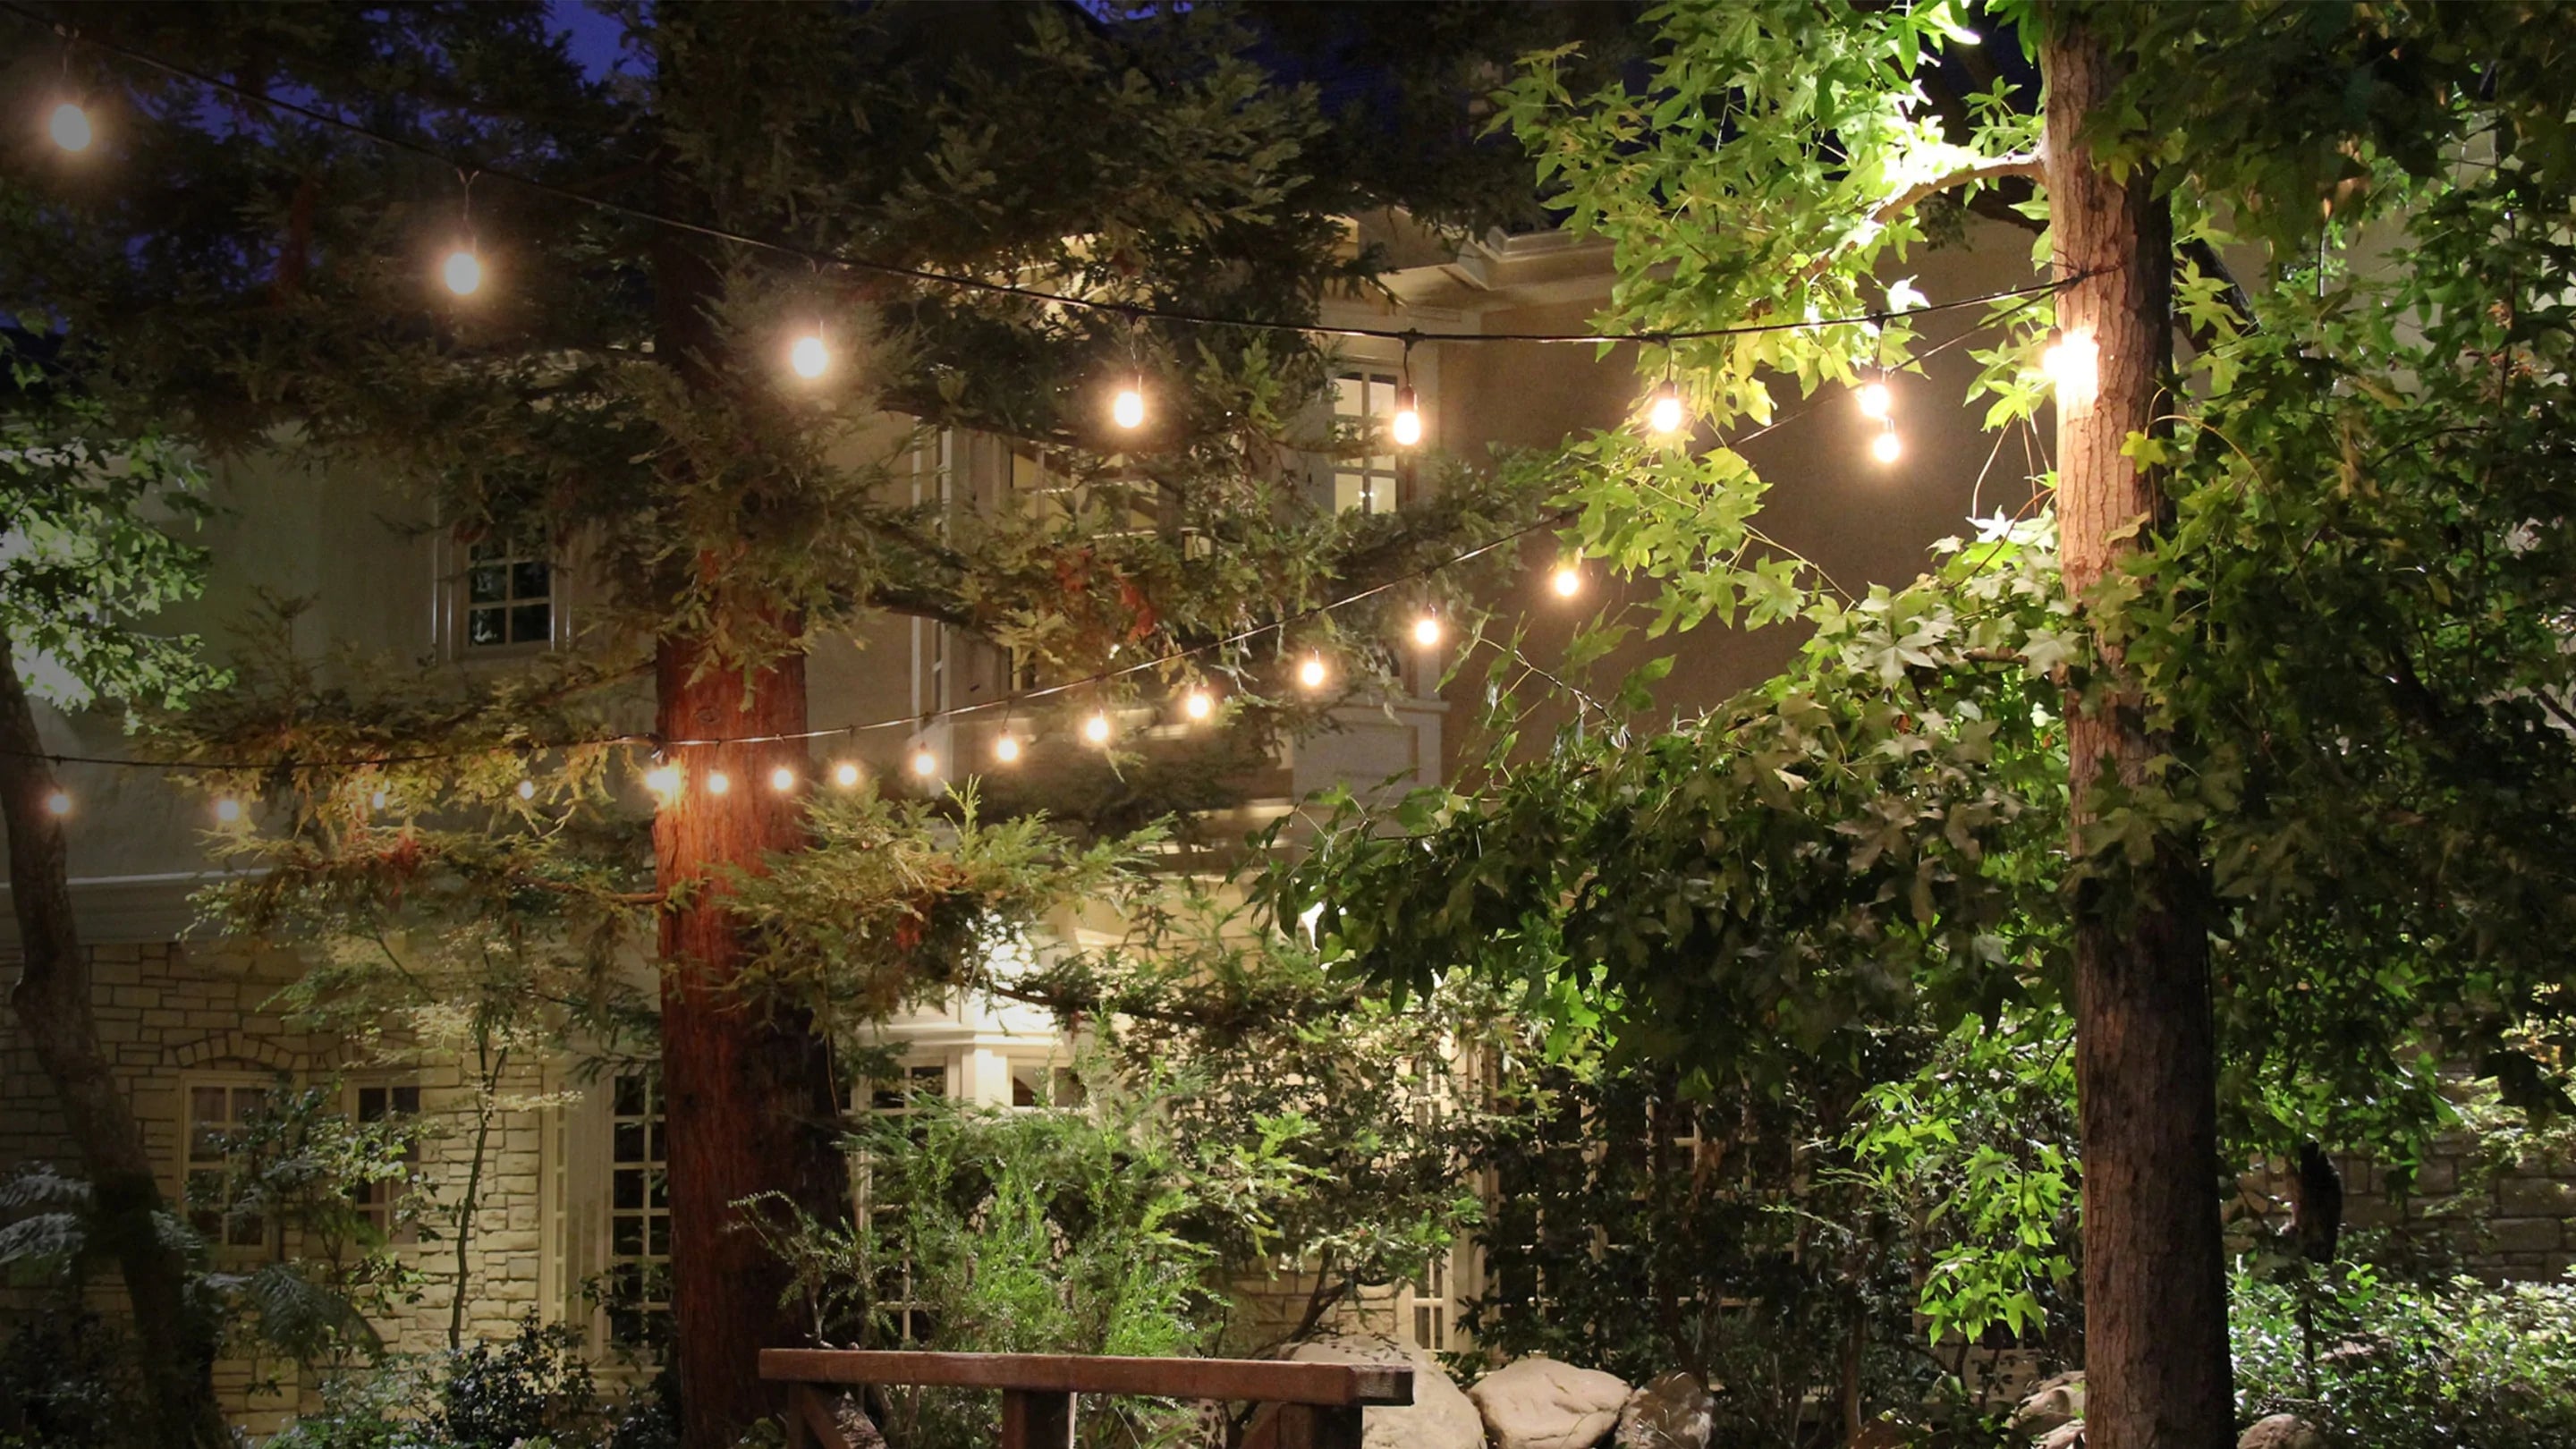 Outdoor Lighting Without Limits